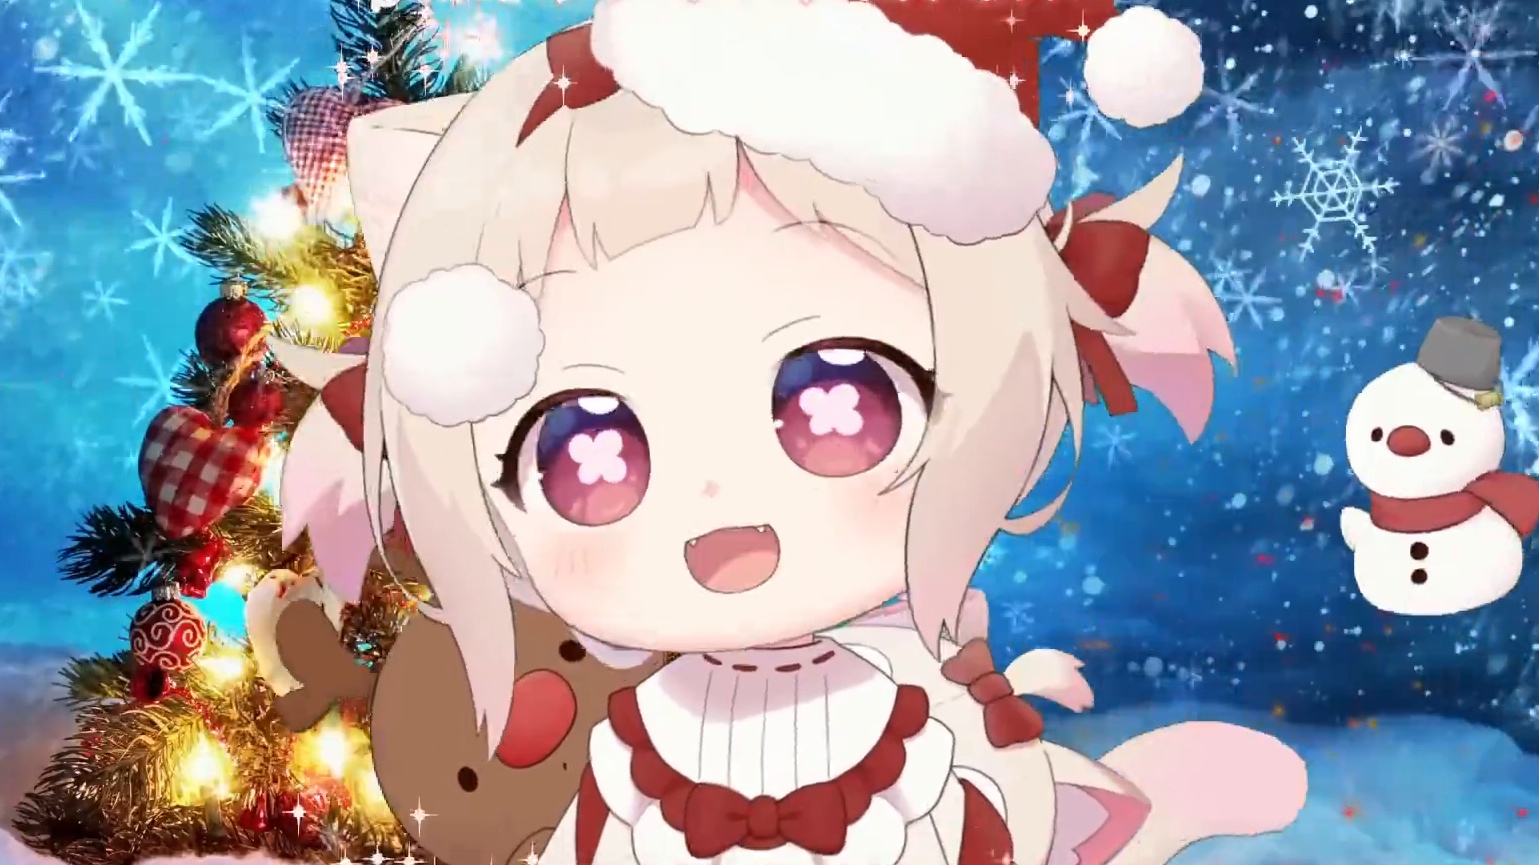 Witness the jolly good cheer of Anime Santa Claus as he spreads joy and happiness in this delightful image. This merry old man is sure to bring a smile to your face and lift your spirits.